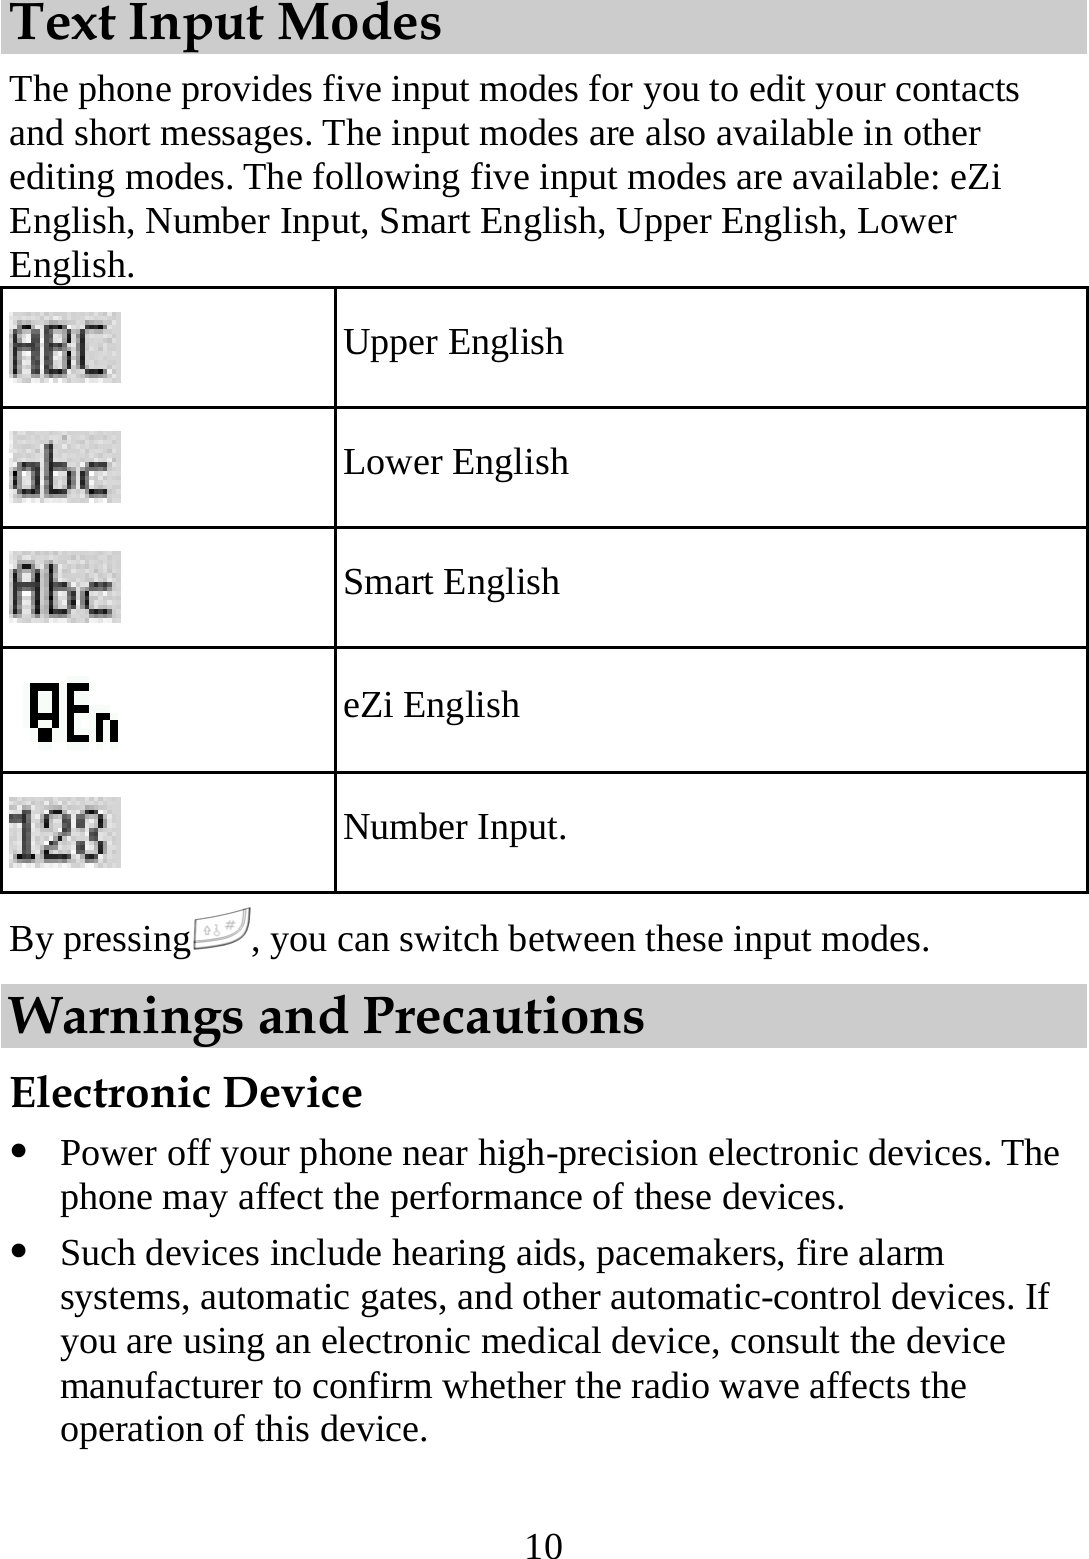  10 Text Input Modes The phone provides five input modes for you to edit your contacts and short messages. The input modes are also available in other editing modes. The following five input modes are available: eZi English, Number Input, Smart English, Upper English, Lower English.  Upper English  Lower English  Smart English  eZi English  Number Input. By pressing , you can switch between these input modes. Warnings and Precautions Electronic Device   Power off your phone near high-precision electronic devices. The phone may affect the performance of these devices.   Such devices include hearing aids, pacemakers, fire alarm systems, automatic gates, and other automatic-control devices. If you are using an electronic medical device, consult the device manufacturer to confirm whether the radio wave affects the operation of this device. 